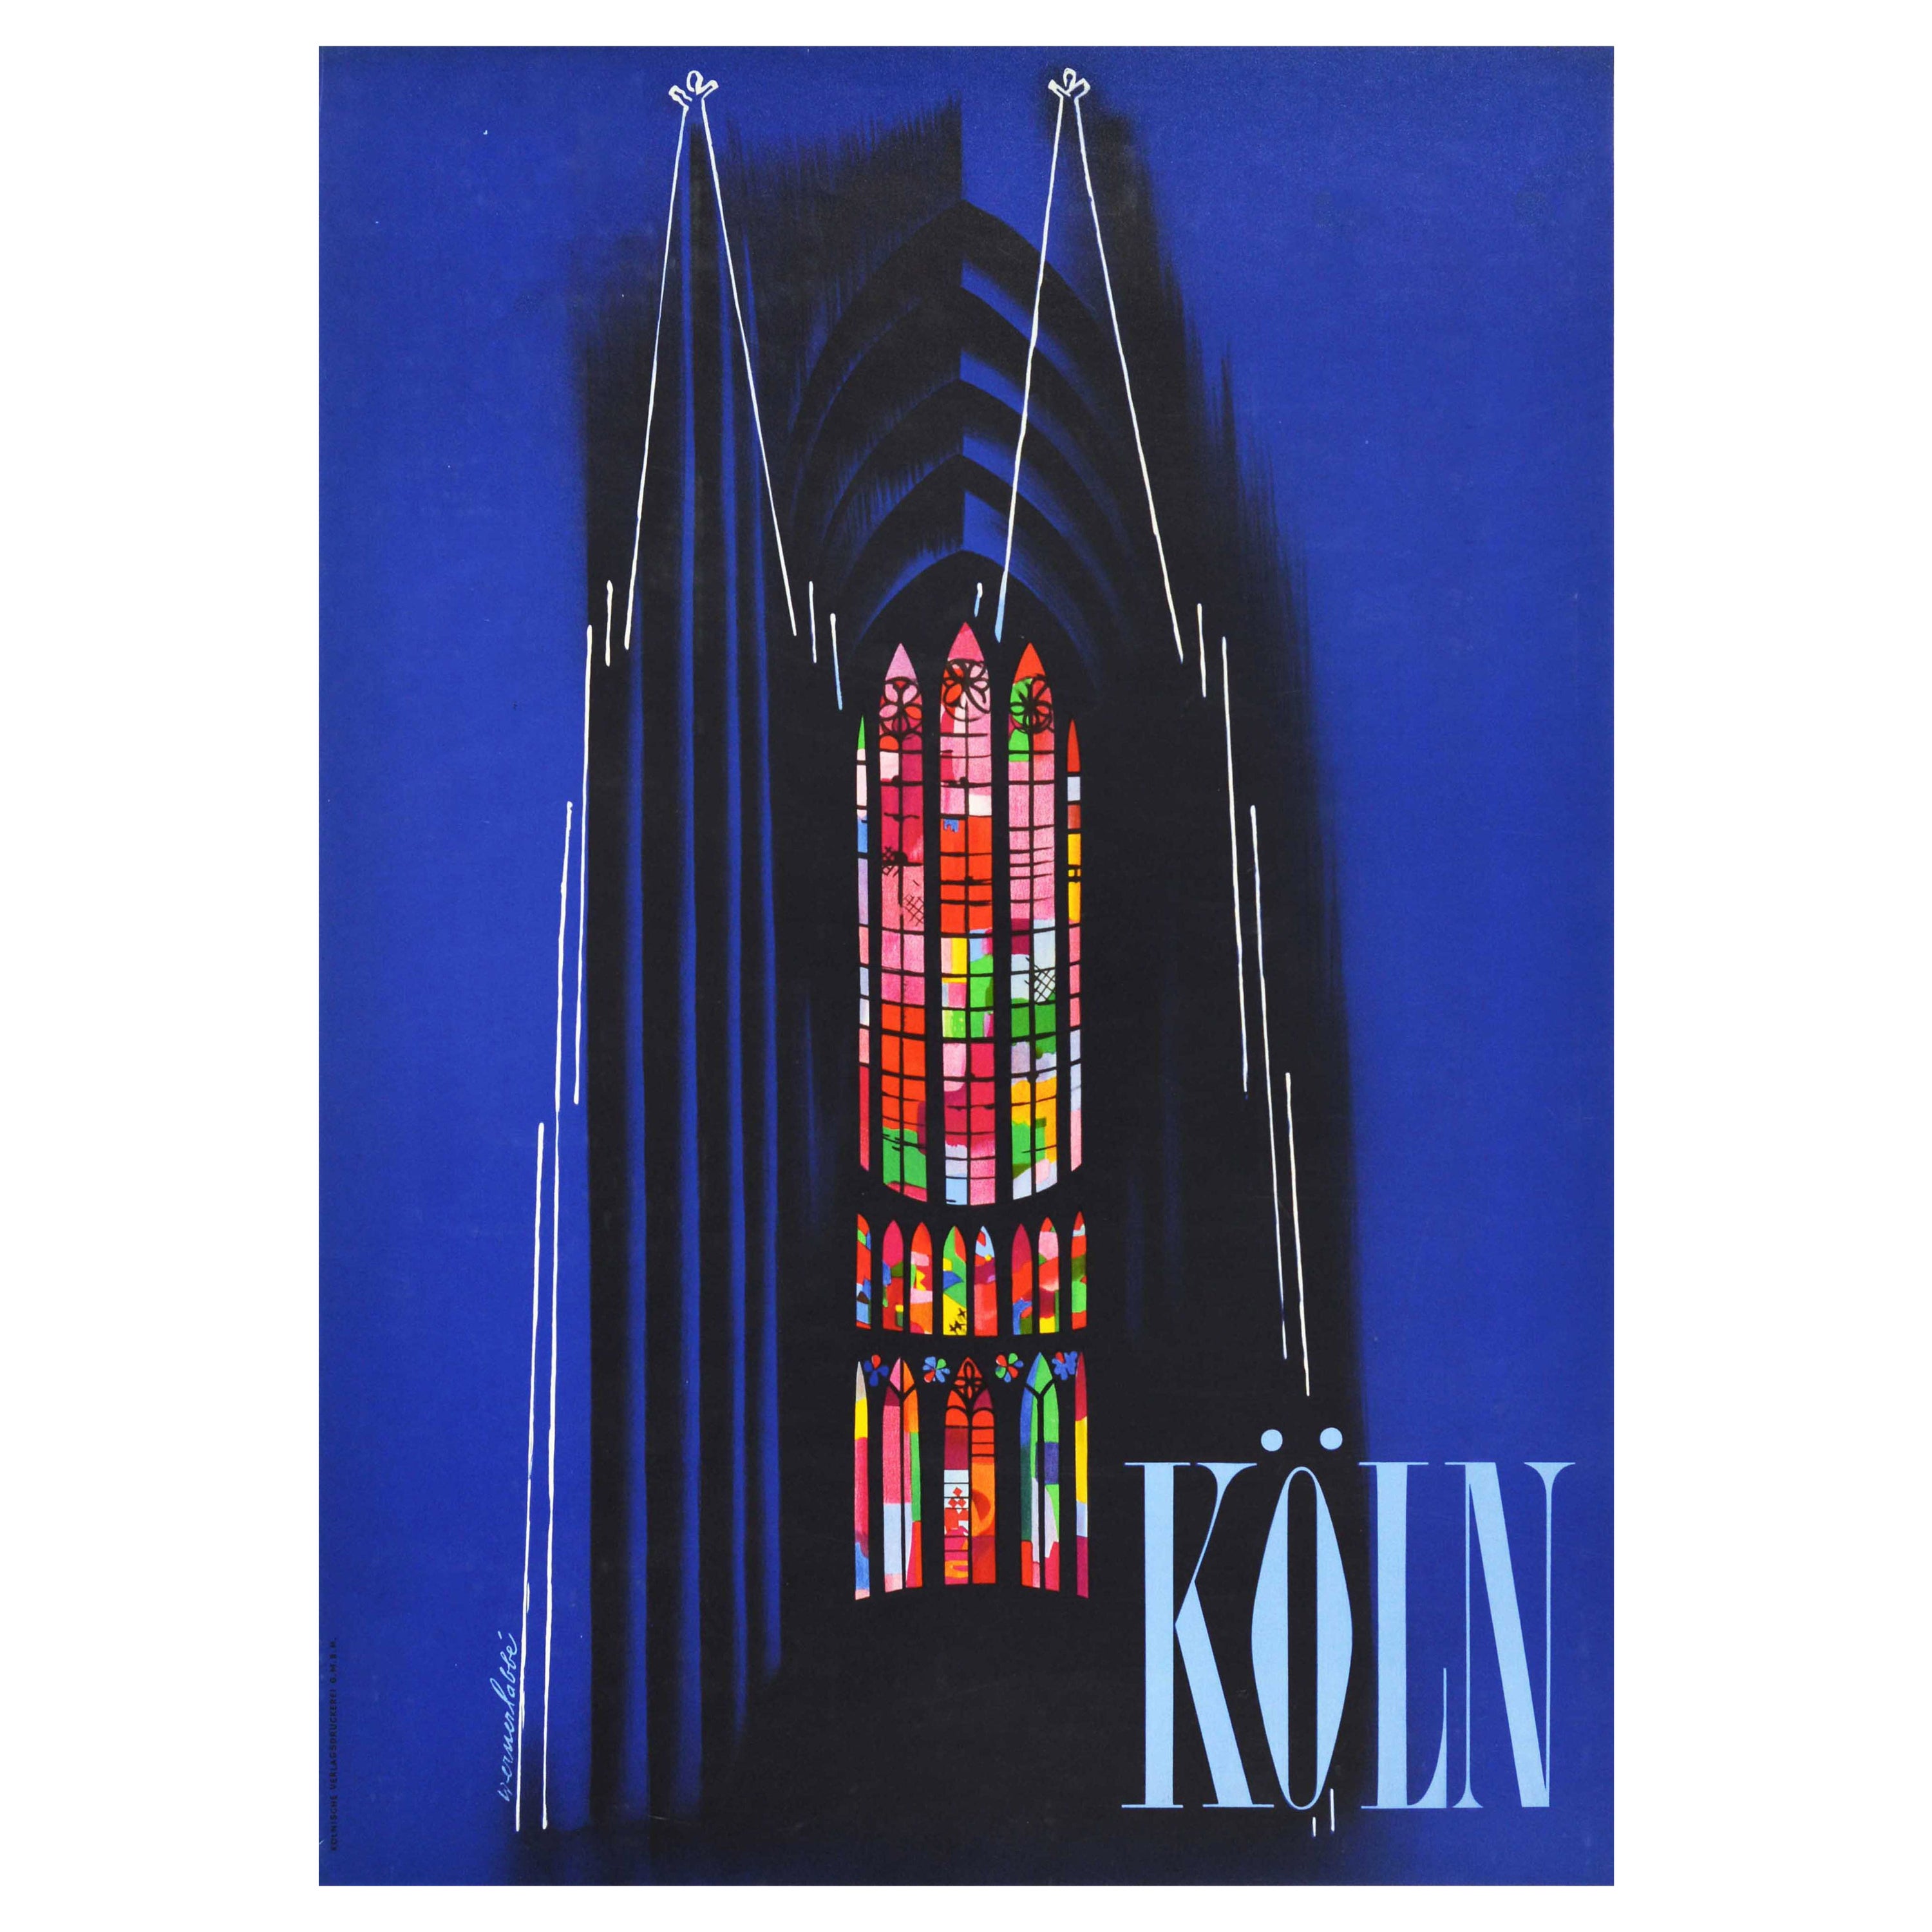 Original Vintage Travel Poster Koln Germany Cologne Cathedral Stained Glass Art